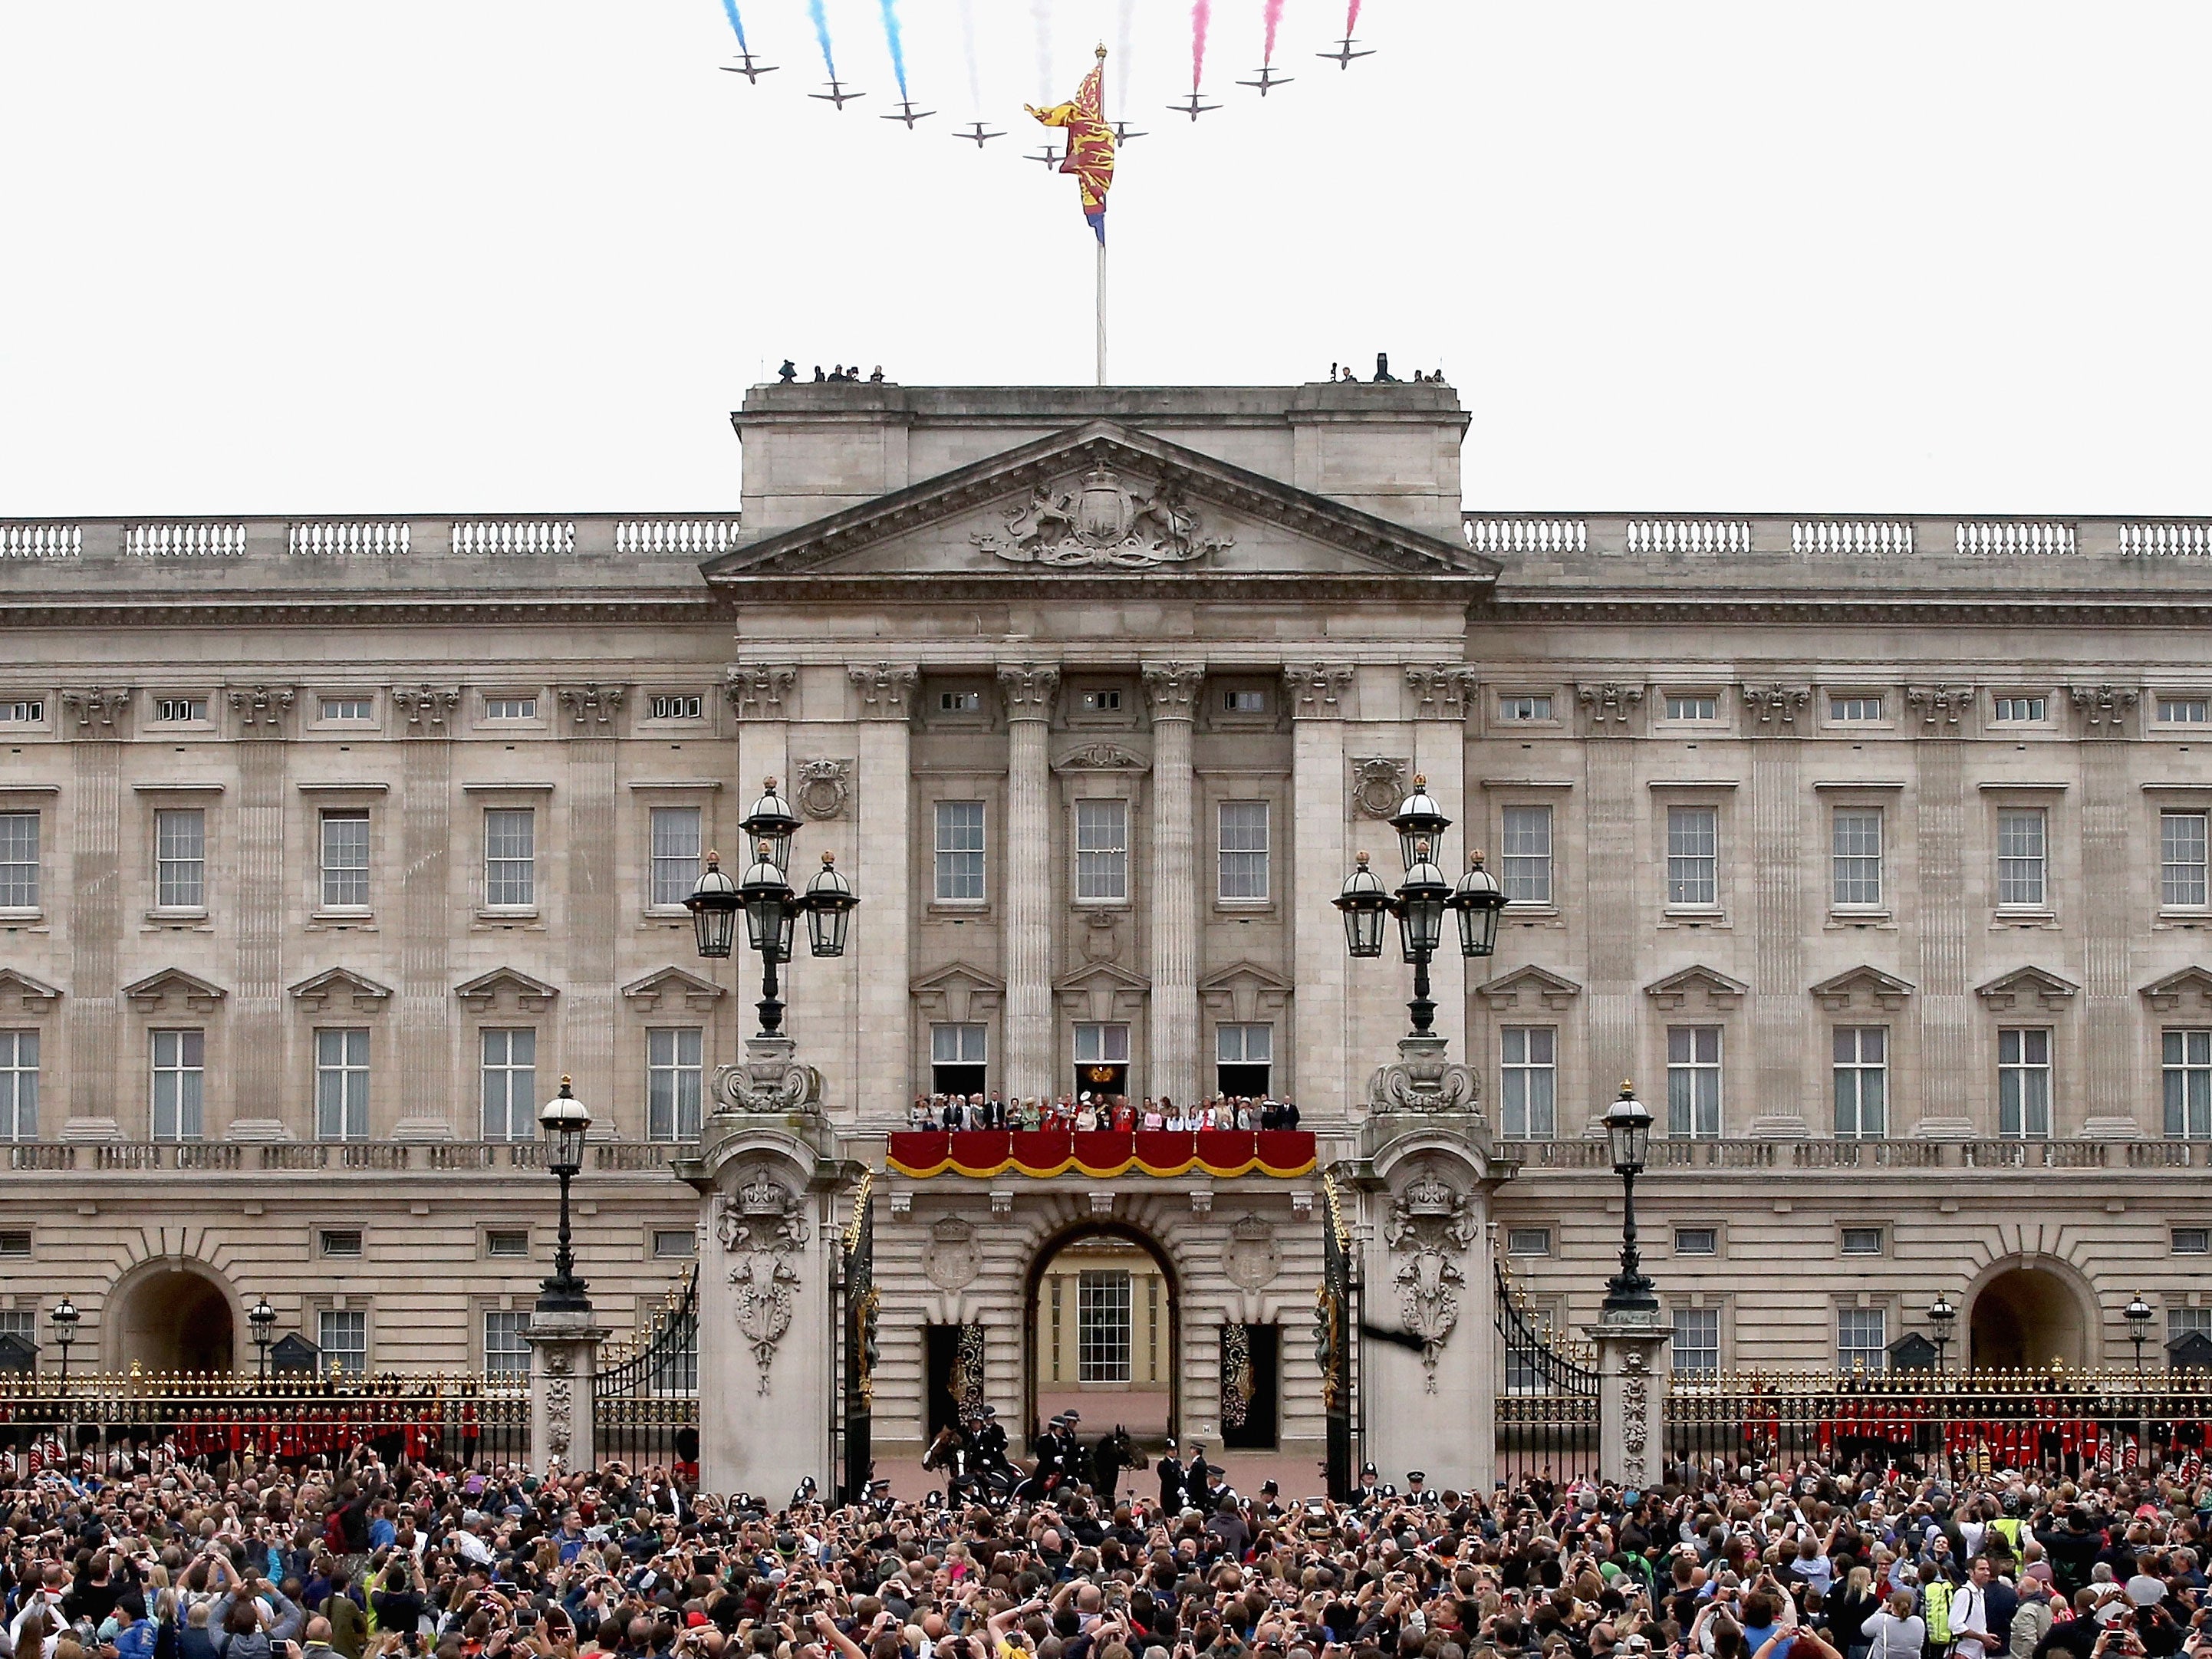 The monarchy cost the taxpayer the equivalent of 56p for each person in the country, according to royal finances released by Buckingham Palace